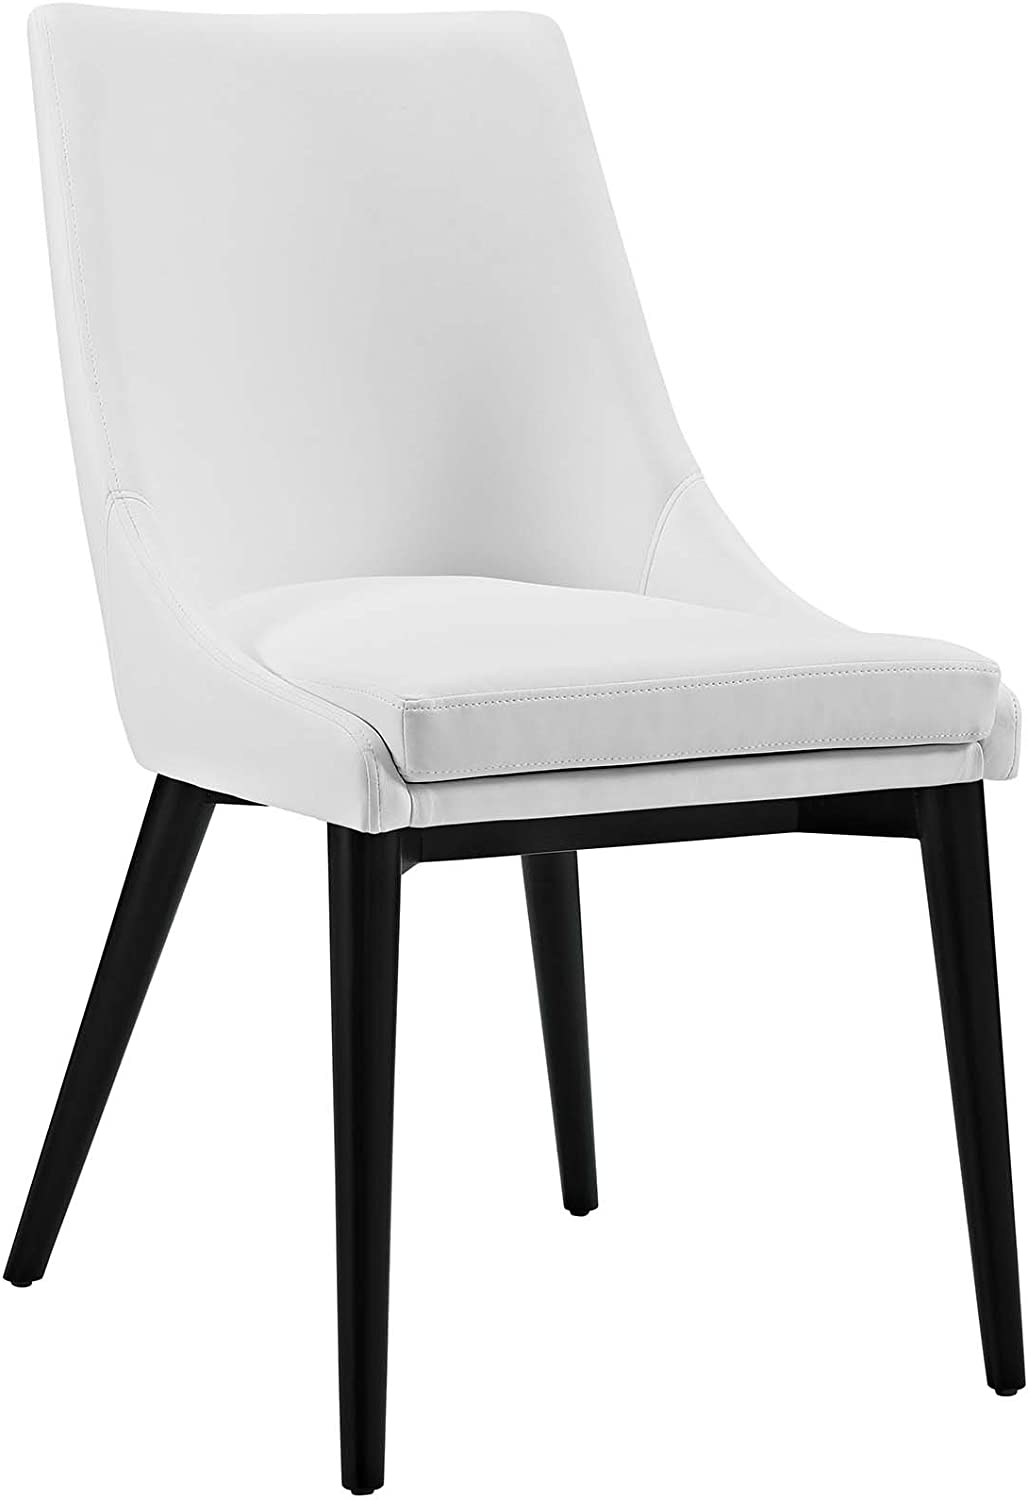 Modway Viscount Mid-Century Modern Faux Leather Upholstered Kitchen and Dining Room Chair in White